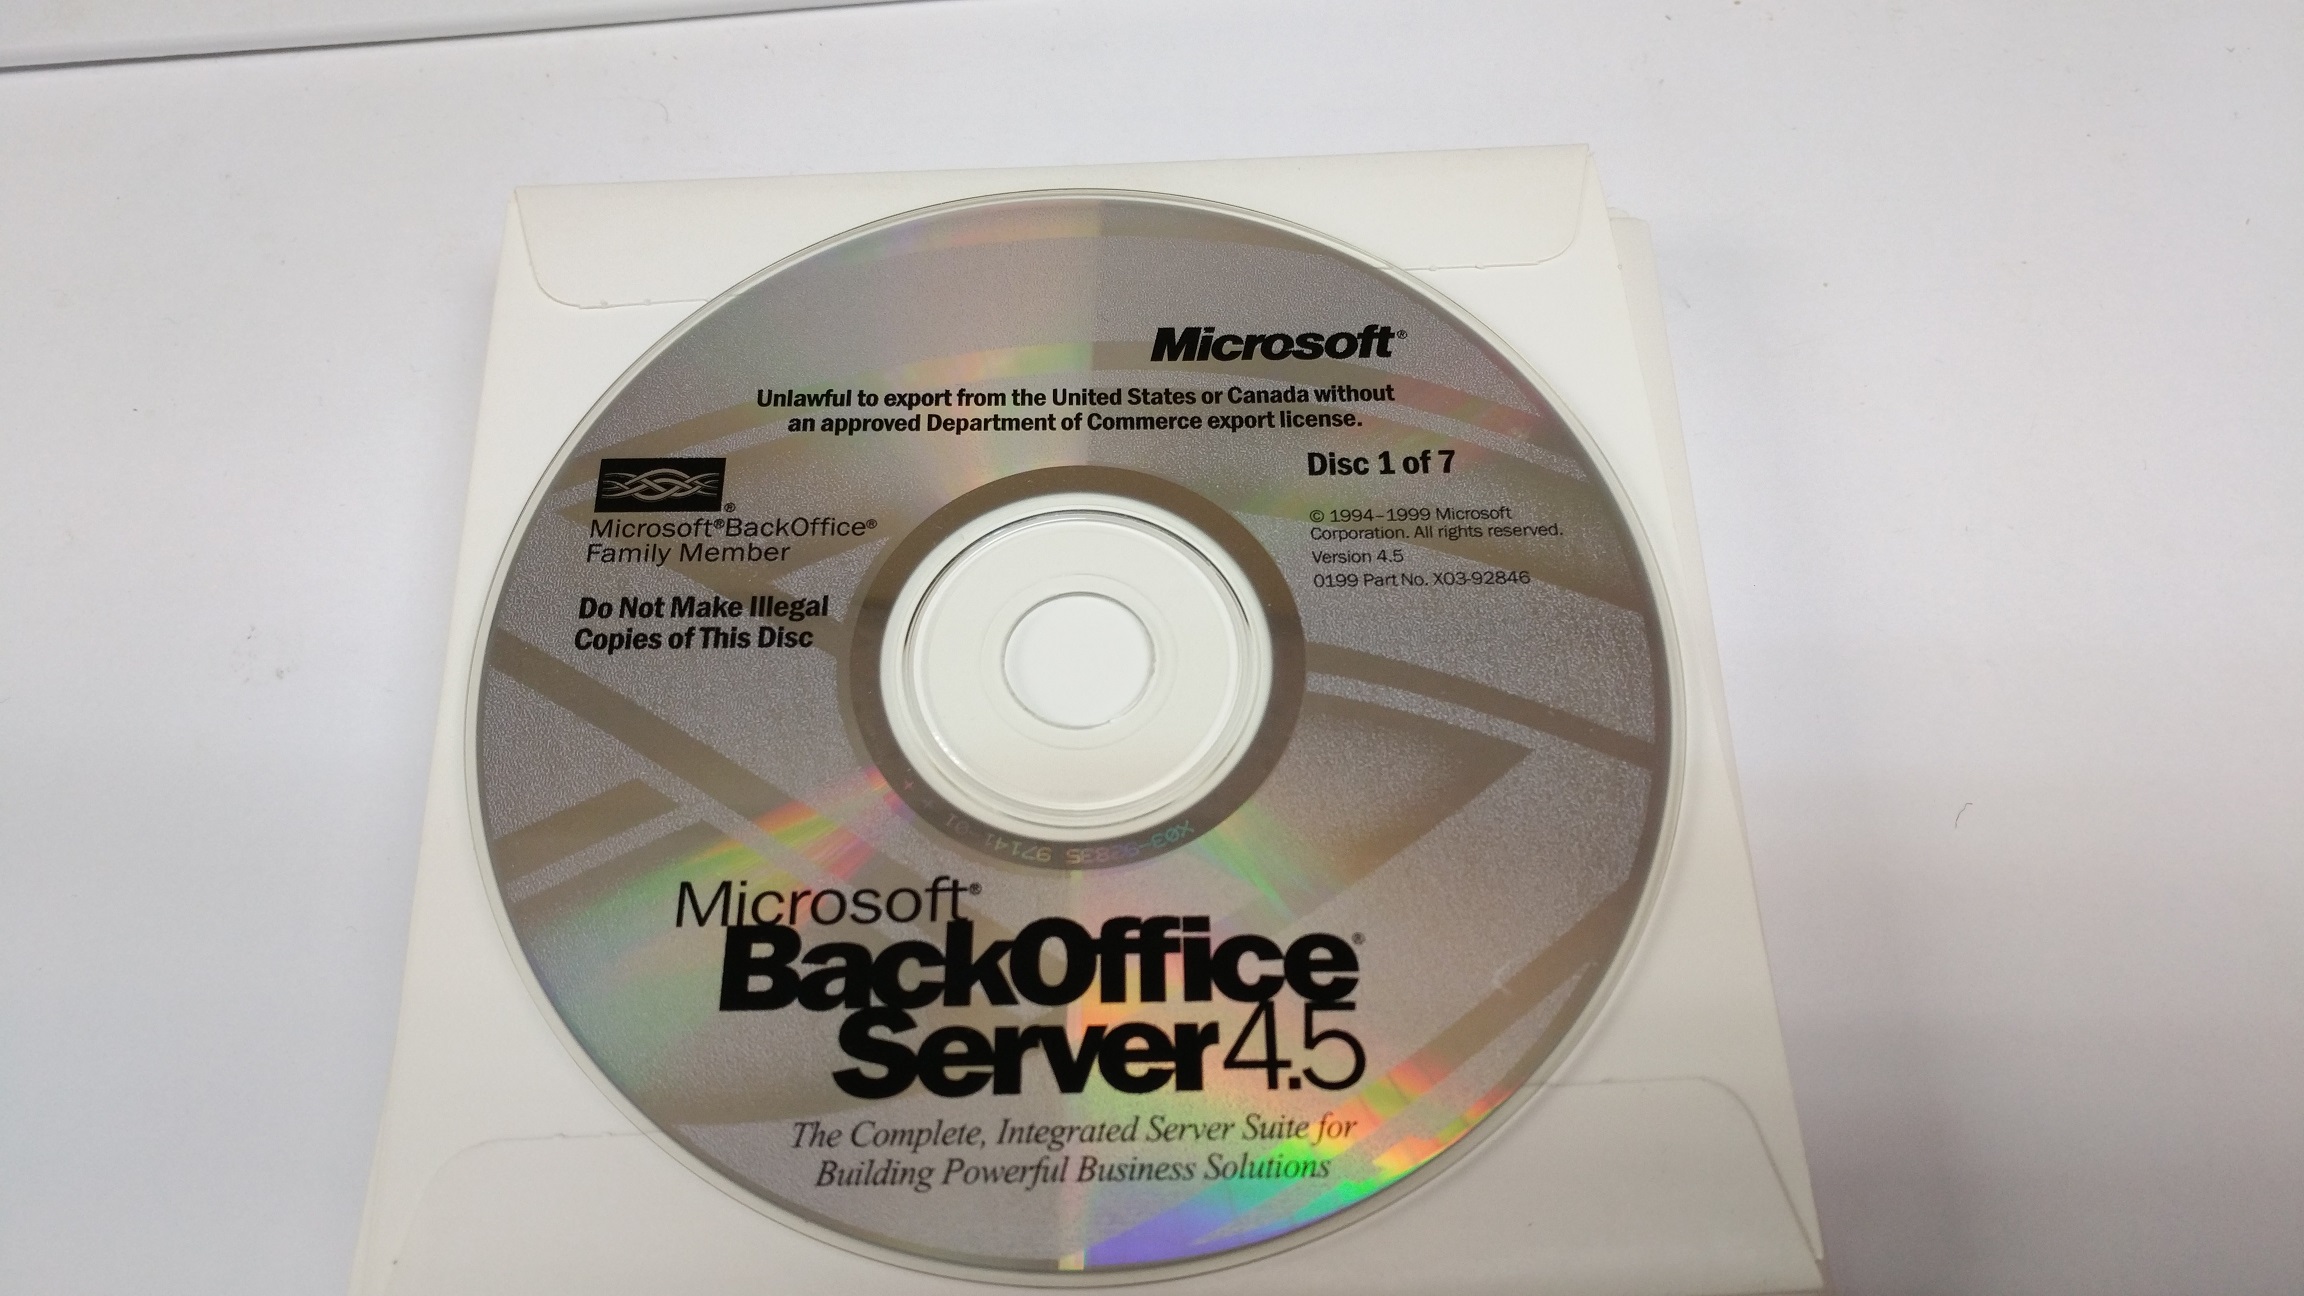 BackOffice Server 4.5 aka how to get the best of 1990's Microsoft 